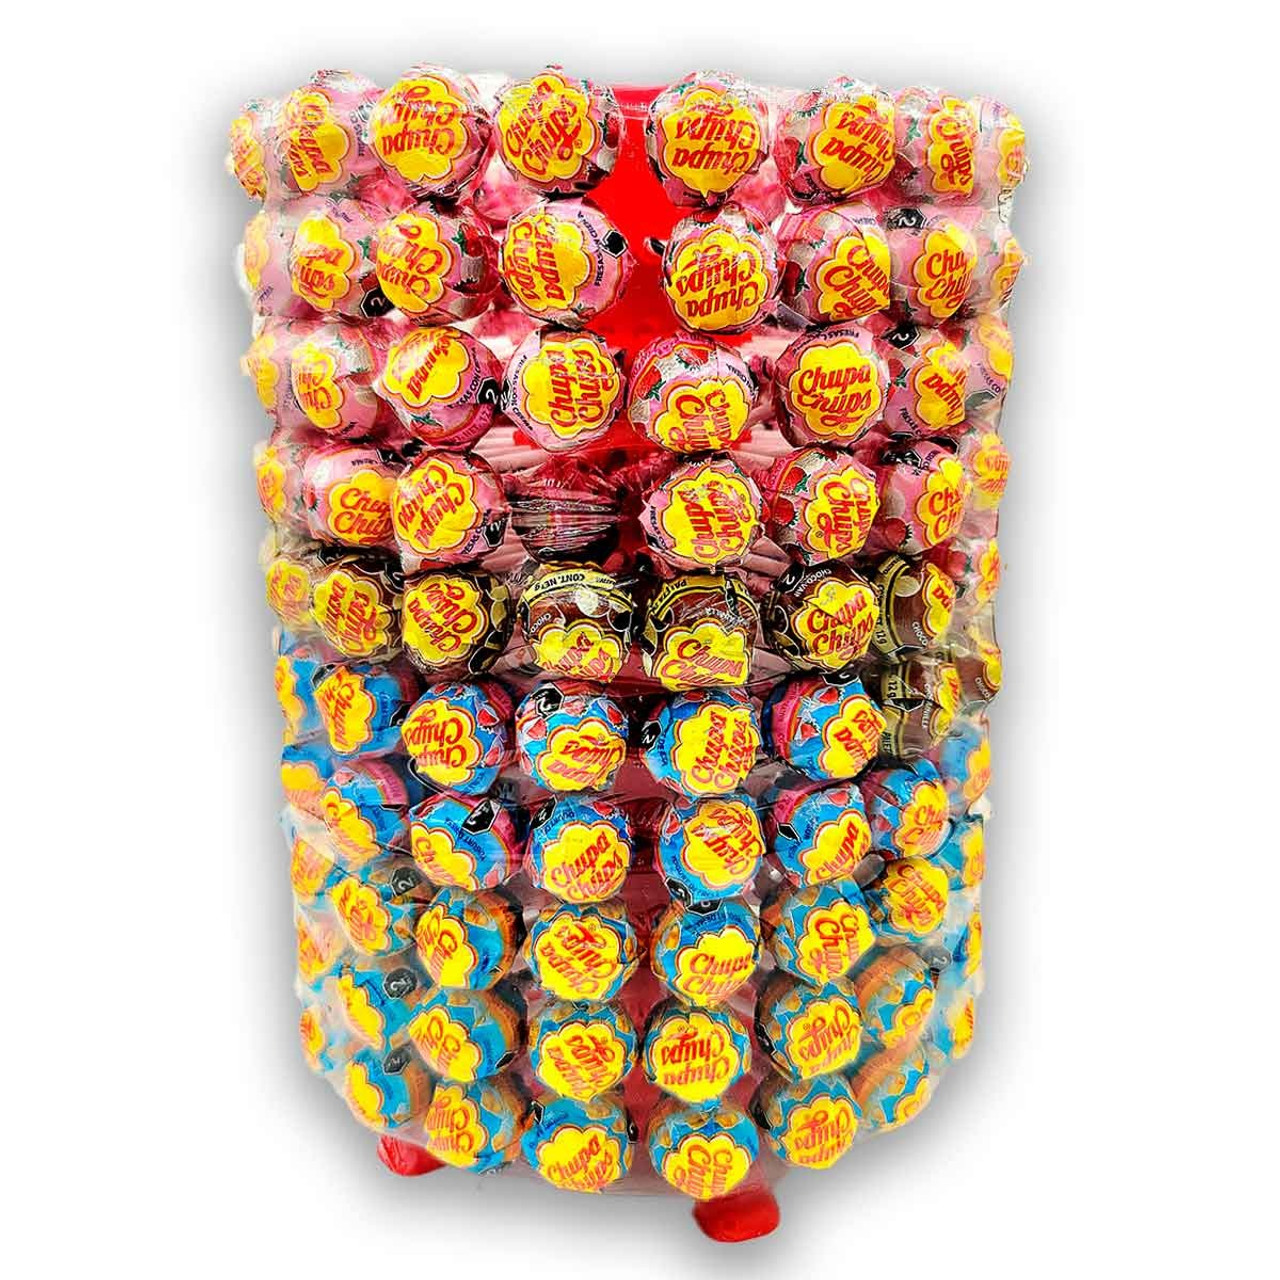 Delicious lollipops full of a different mix of flavors that go from vanilla to chocolate to strawberry or mango.